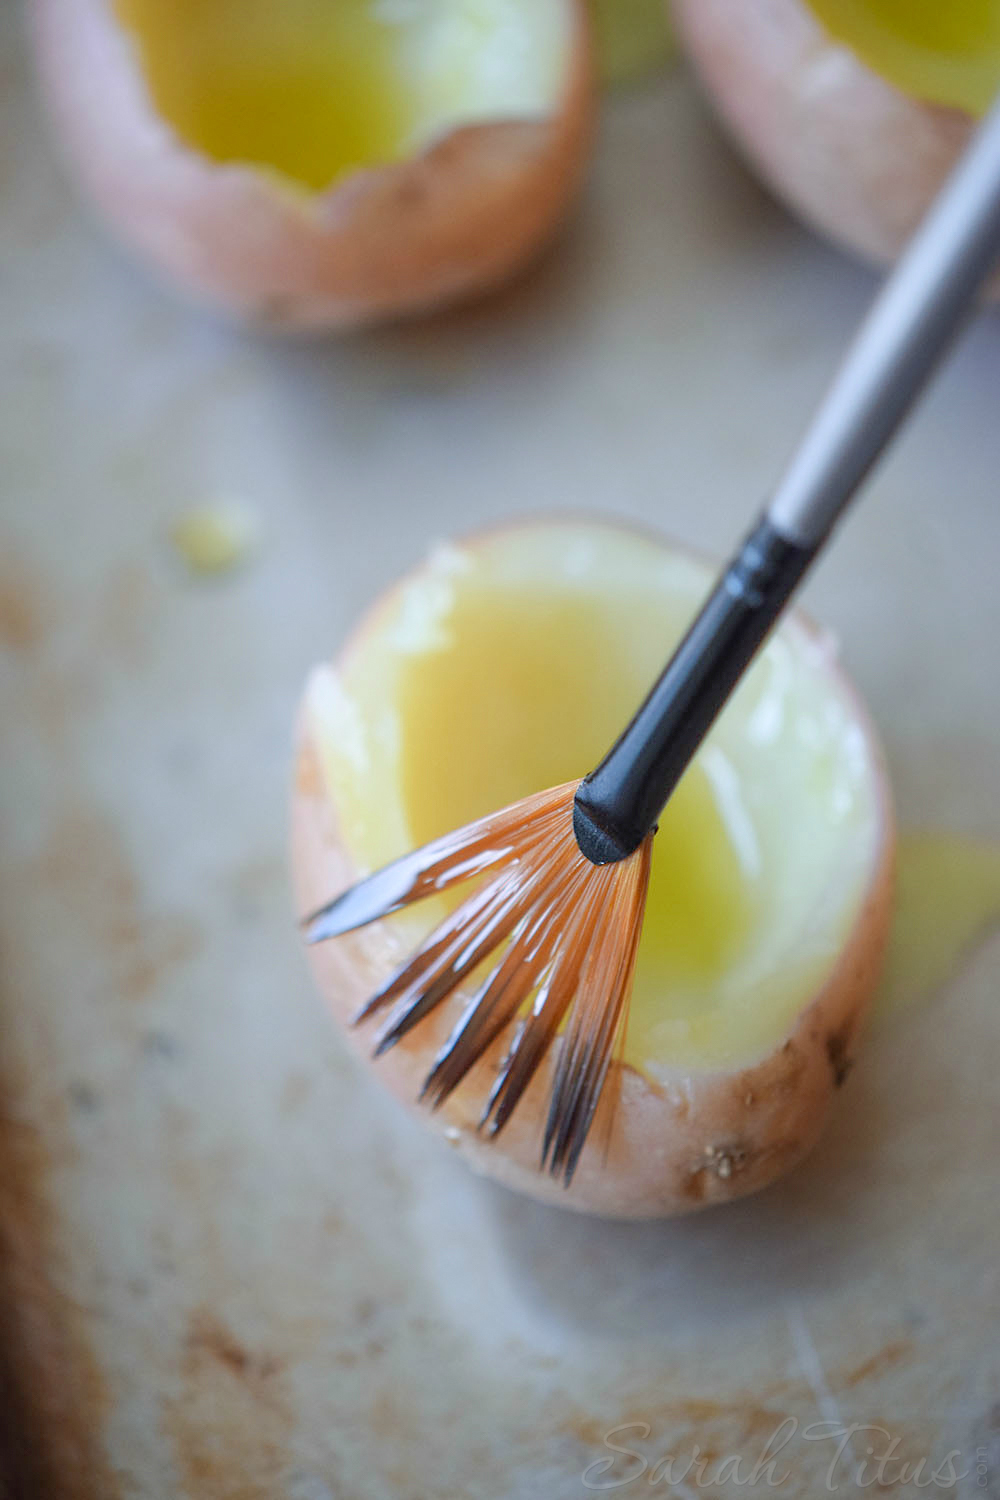 Mini Stuffed Potato Bites - Brushing the red potatoes with melted butter